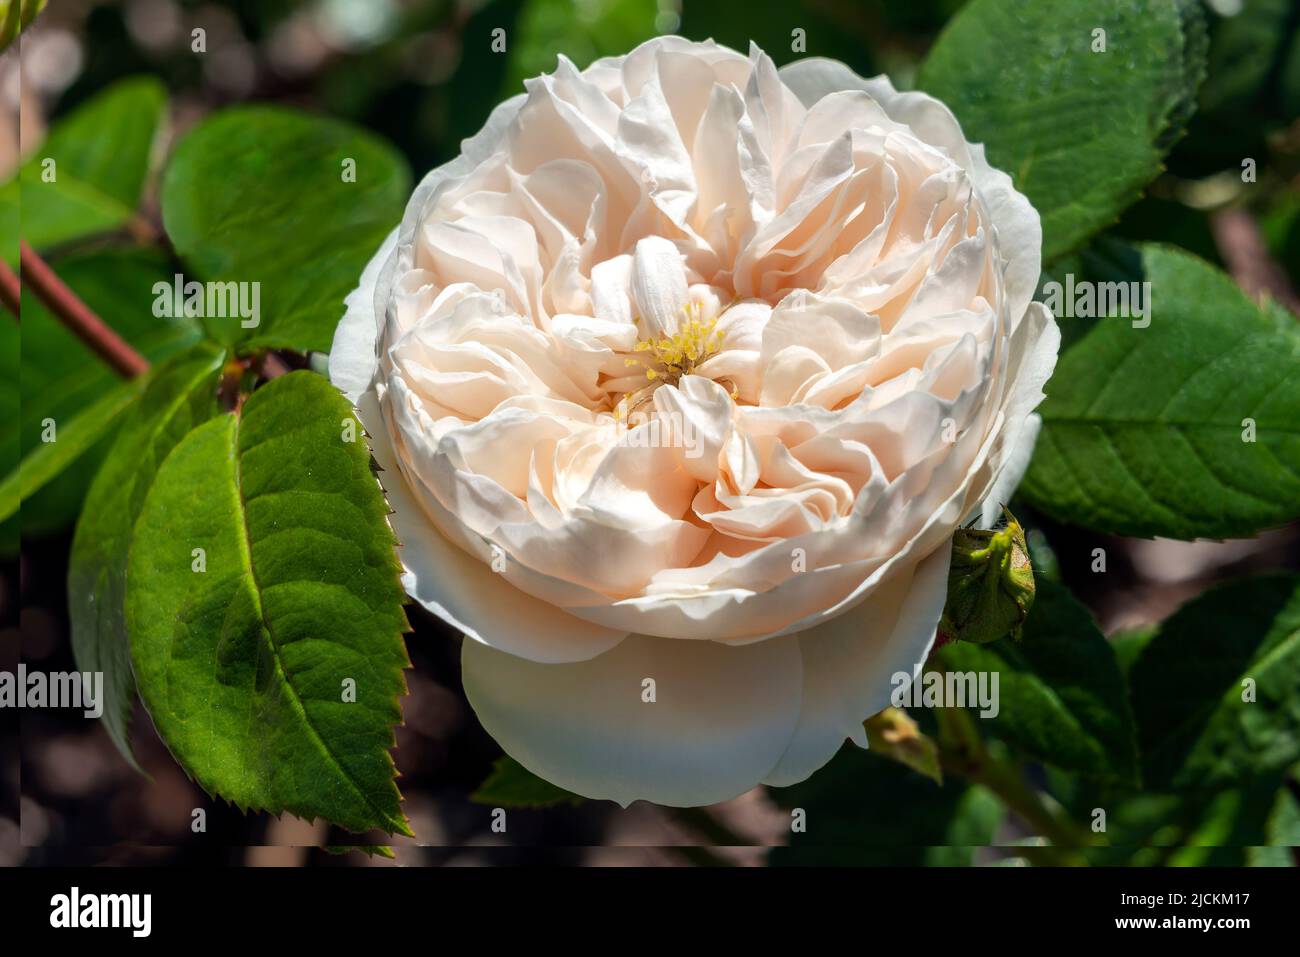 Rose (rosa) 'Macmillan Nurse' a summer autumn fall flowering shrub plant with a white summertime double flower, stock photo image Stock Photo